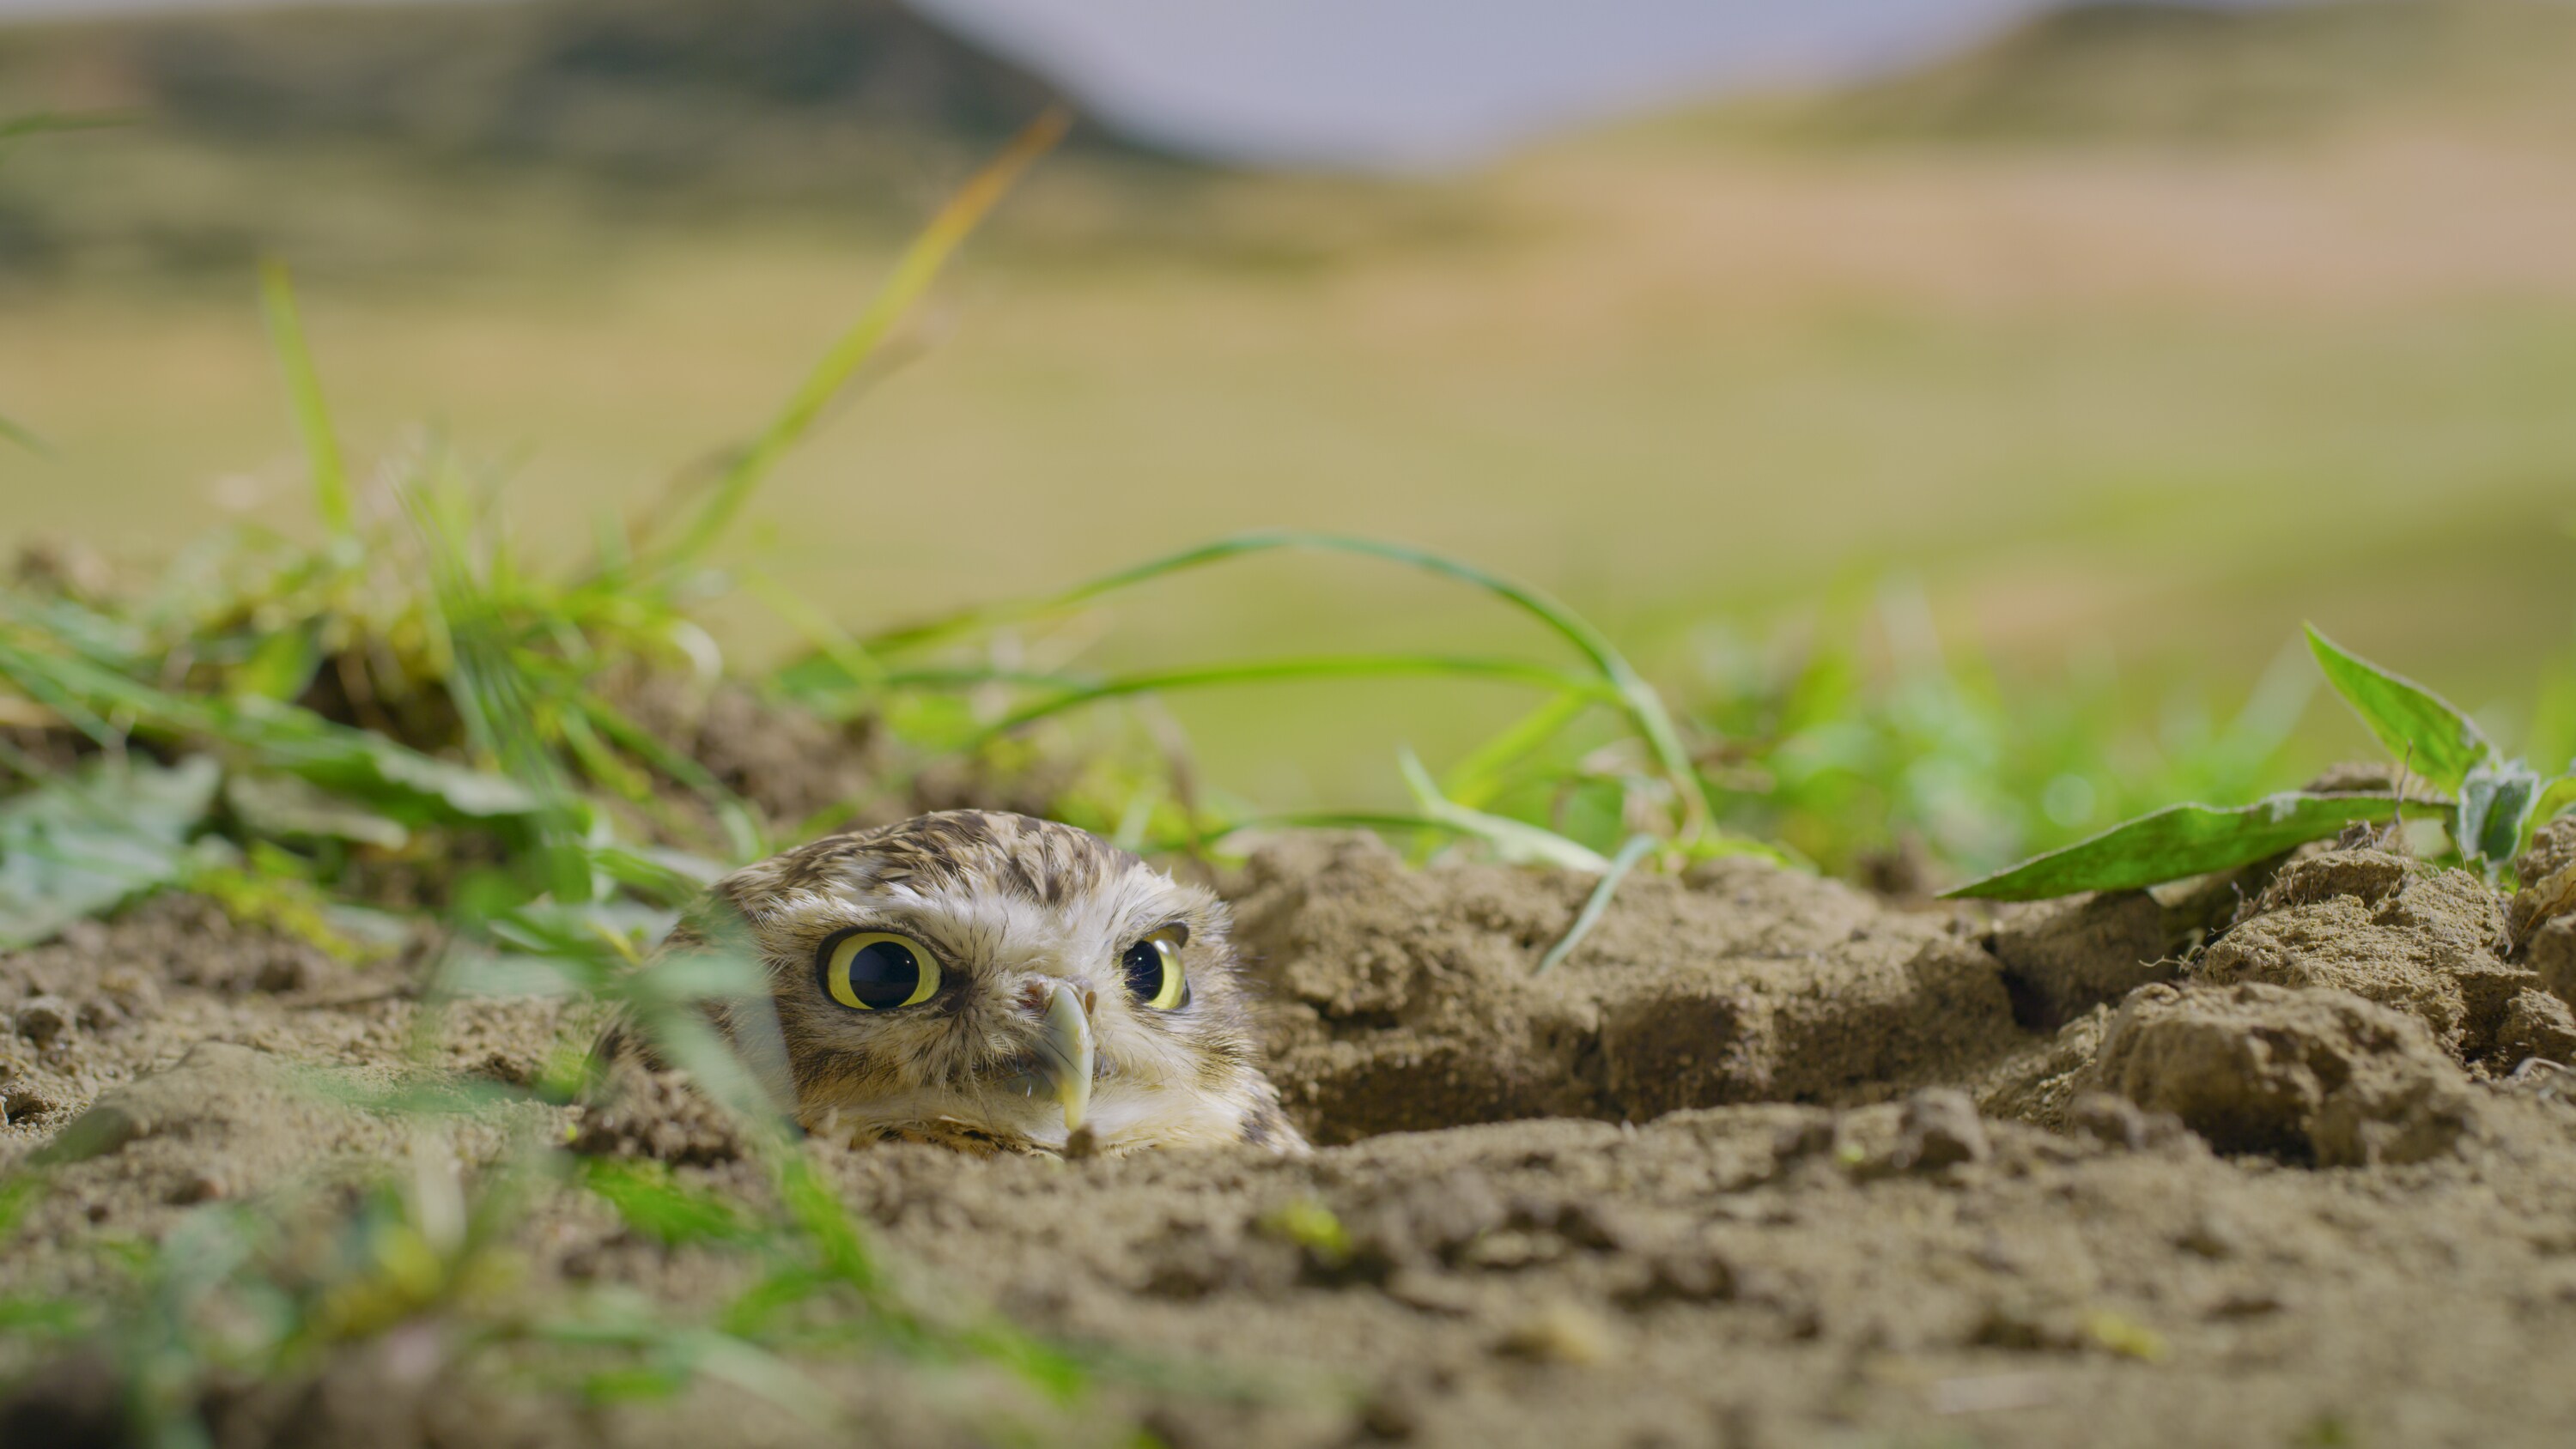 A burrowing owl looks alarmed from the burrow entrance. (National Geographic for Disney+)